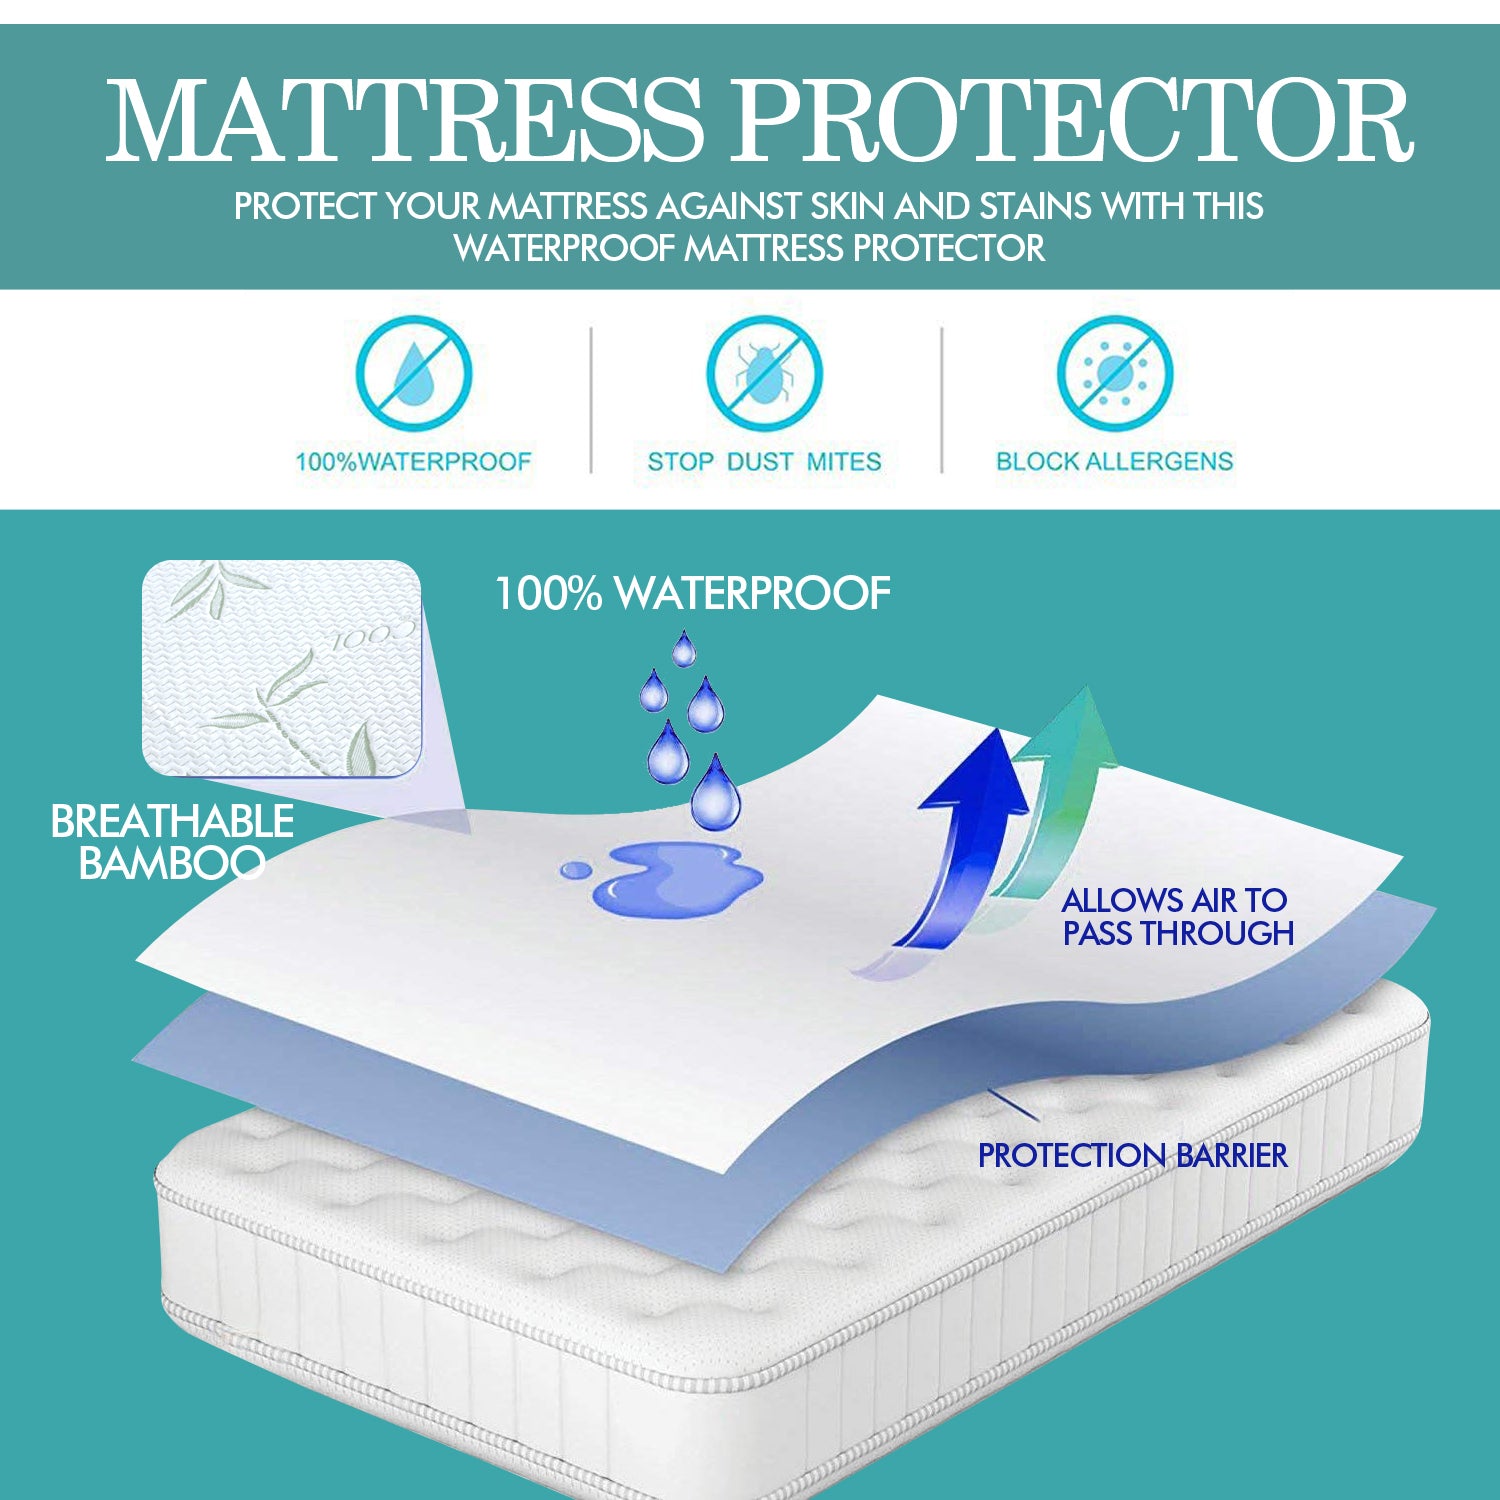 Fitted Waterproof Breathable Bamboo Mattress Protector Super King Size - image6